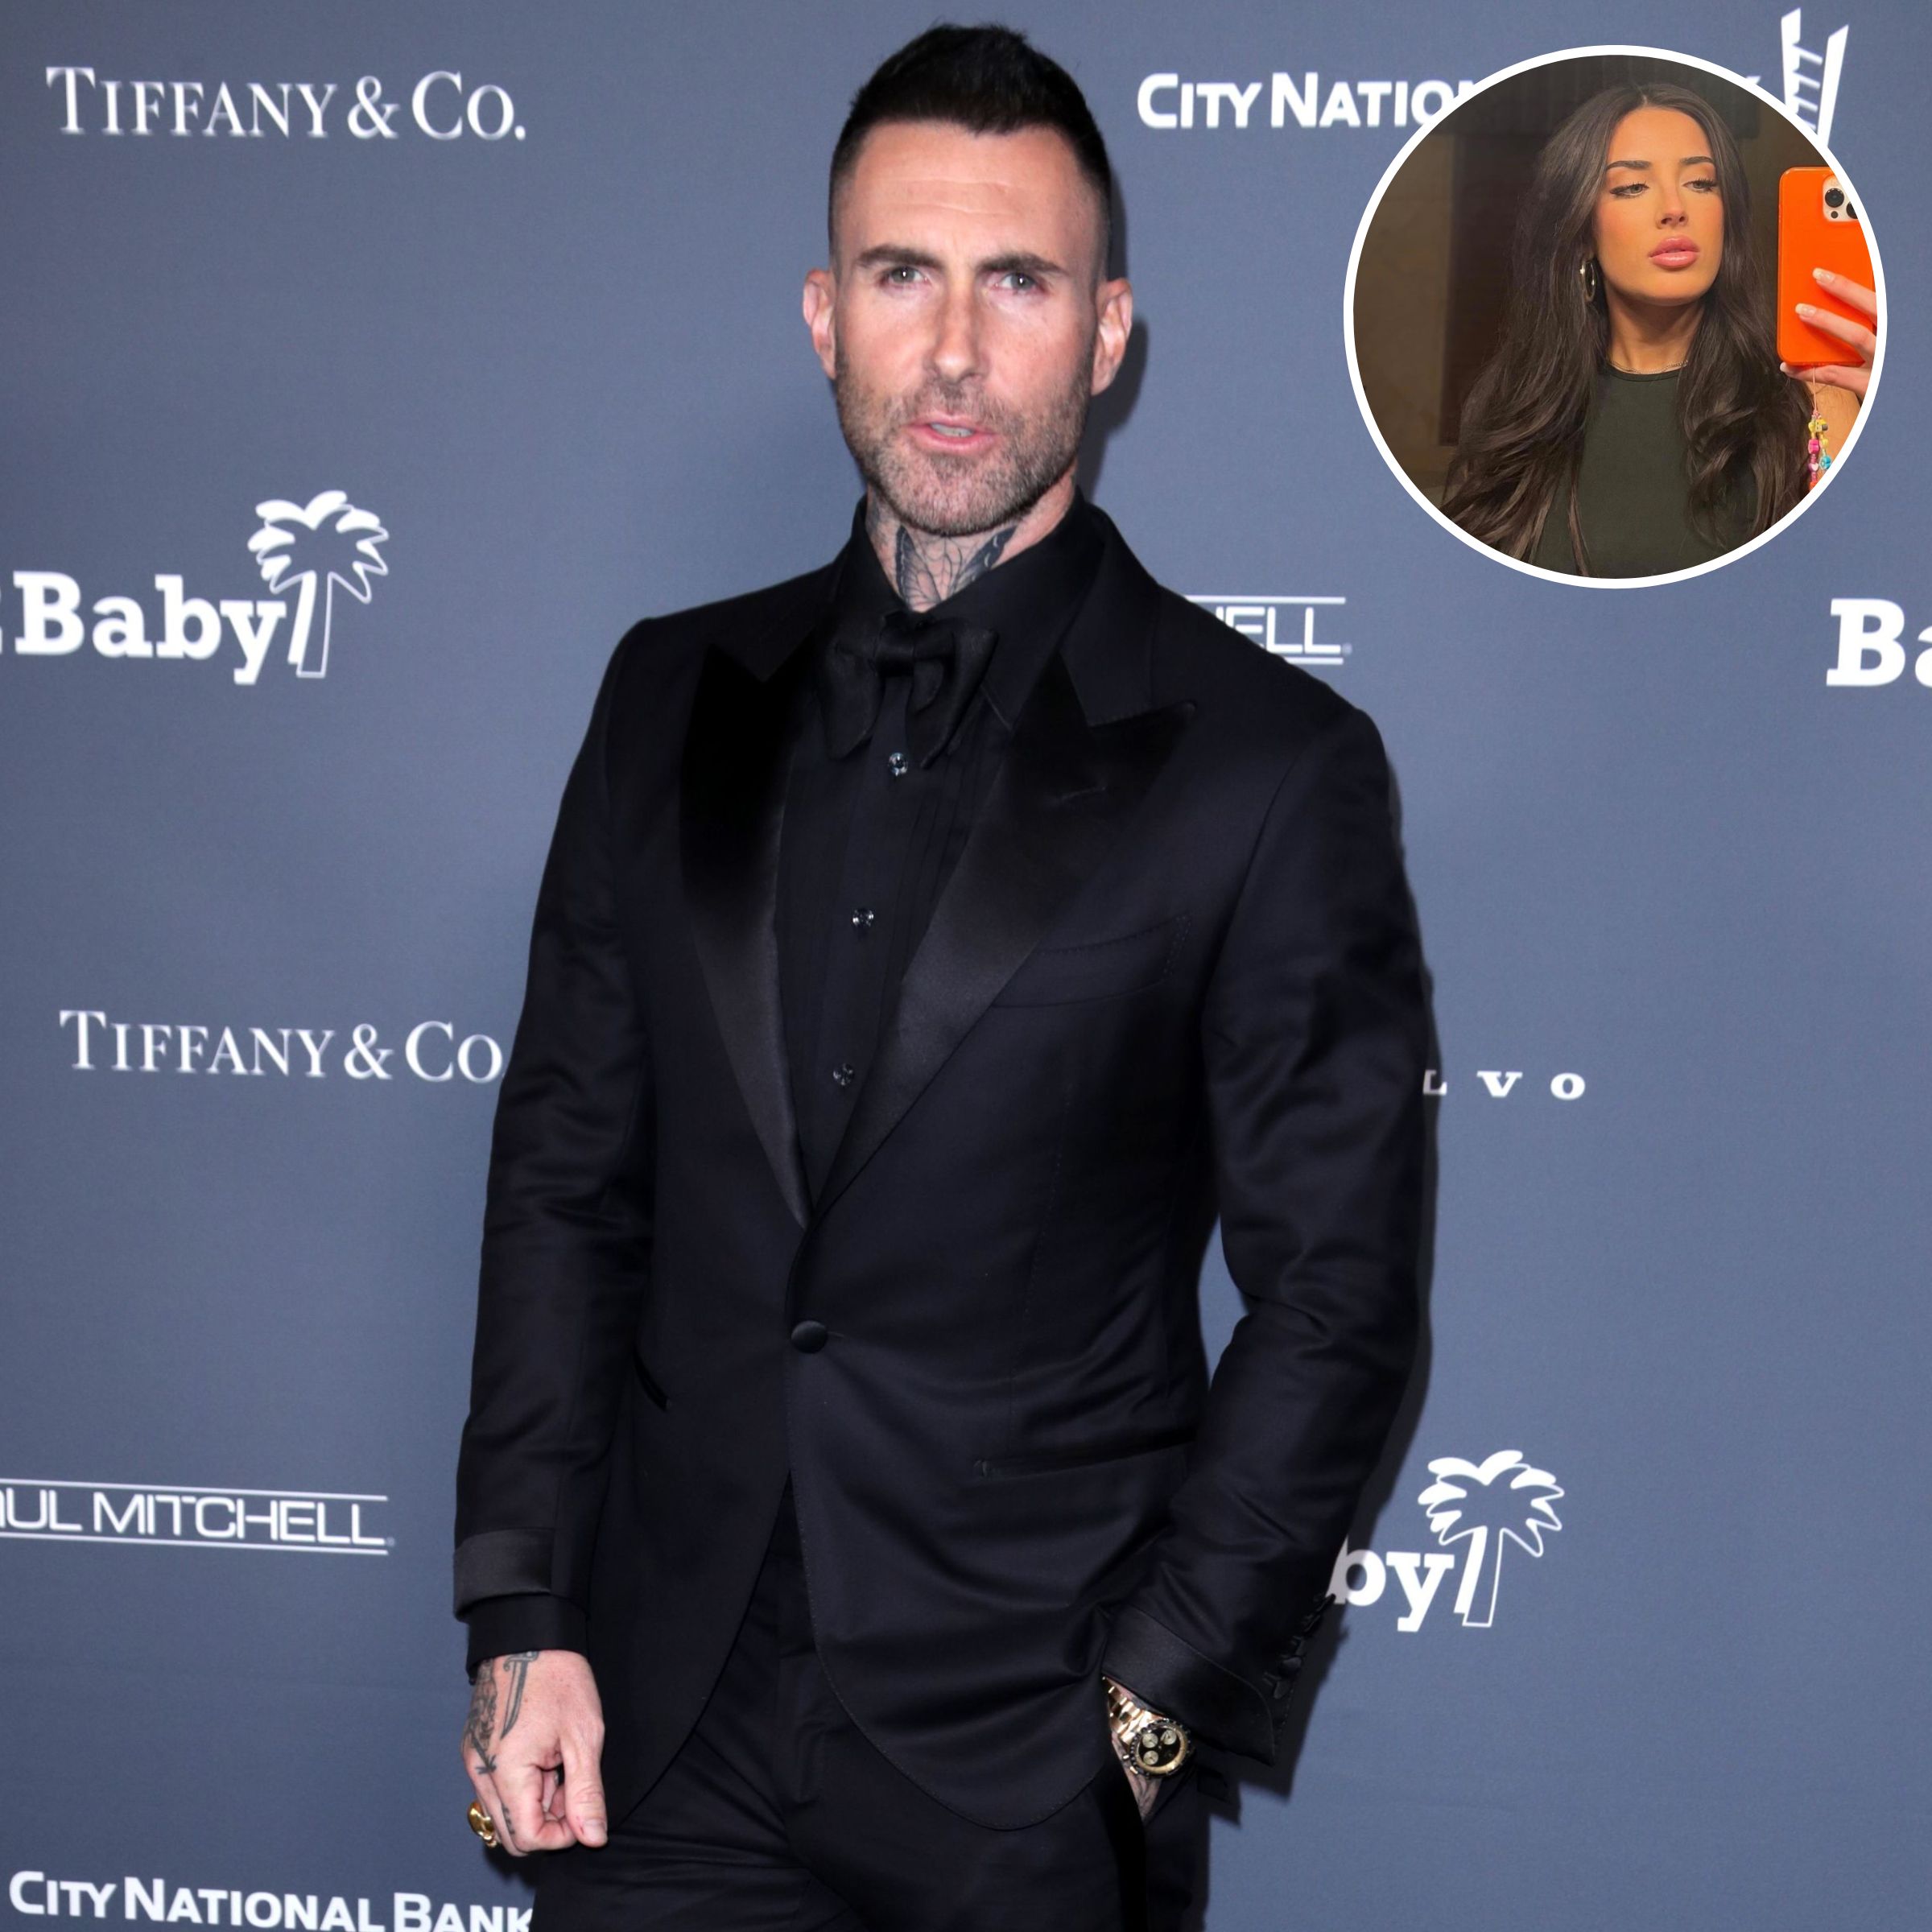 Instagram model accused Adam Levine of having an affair with her